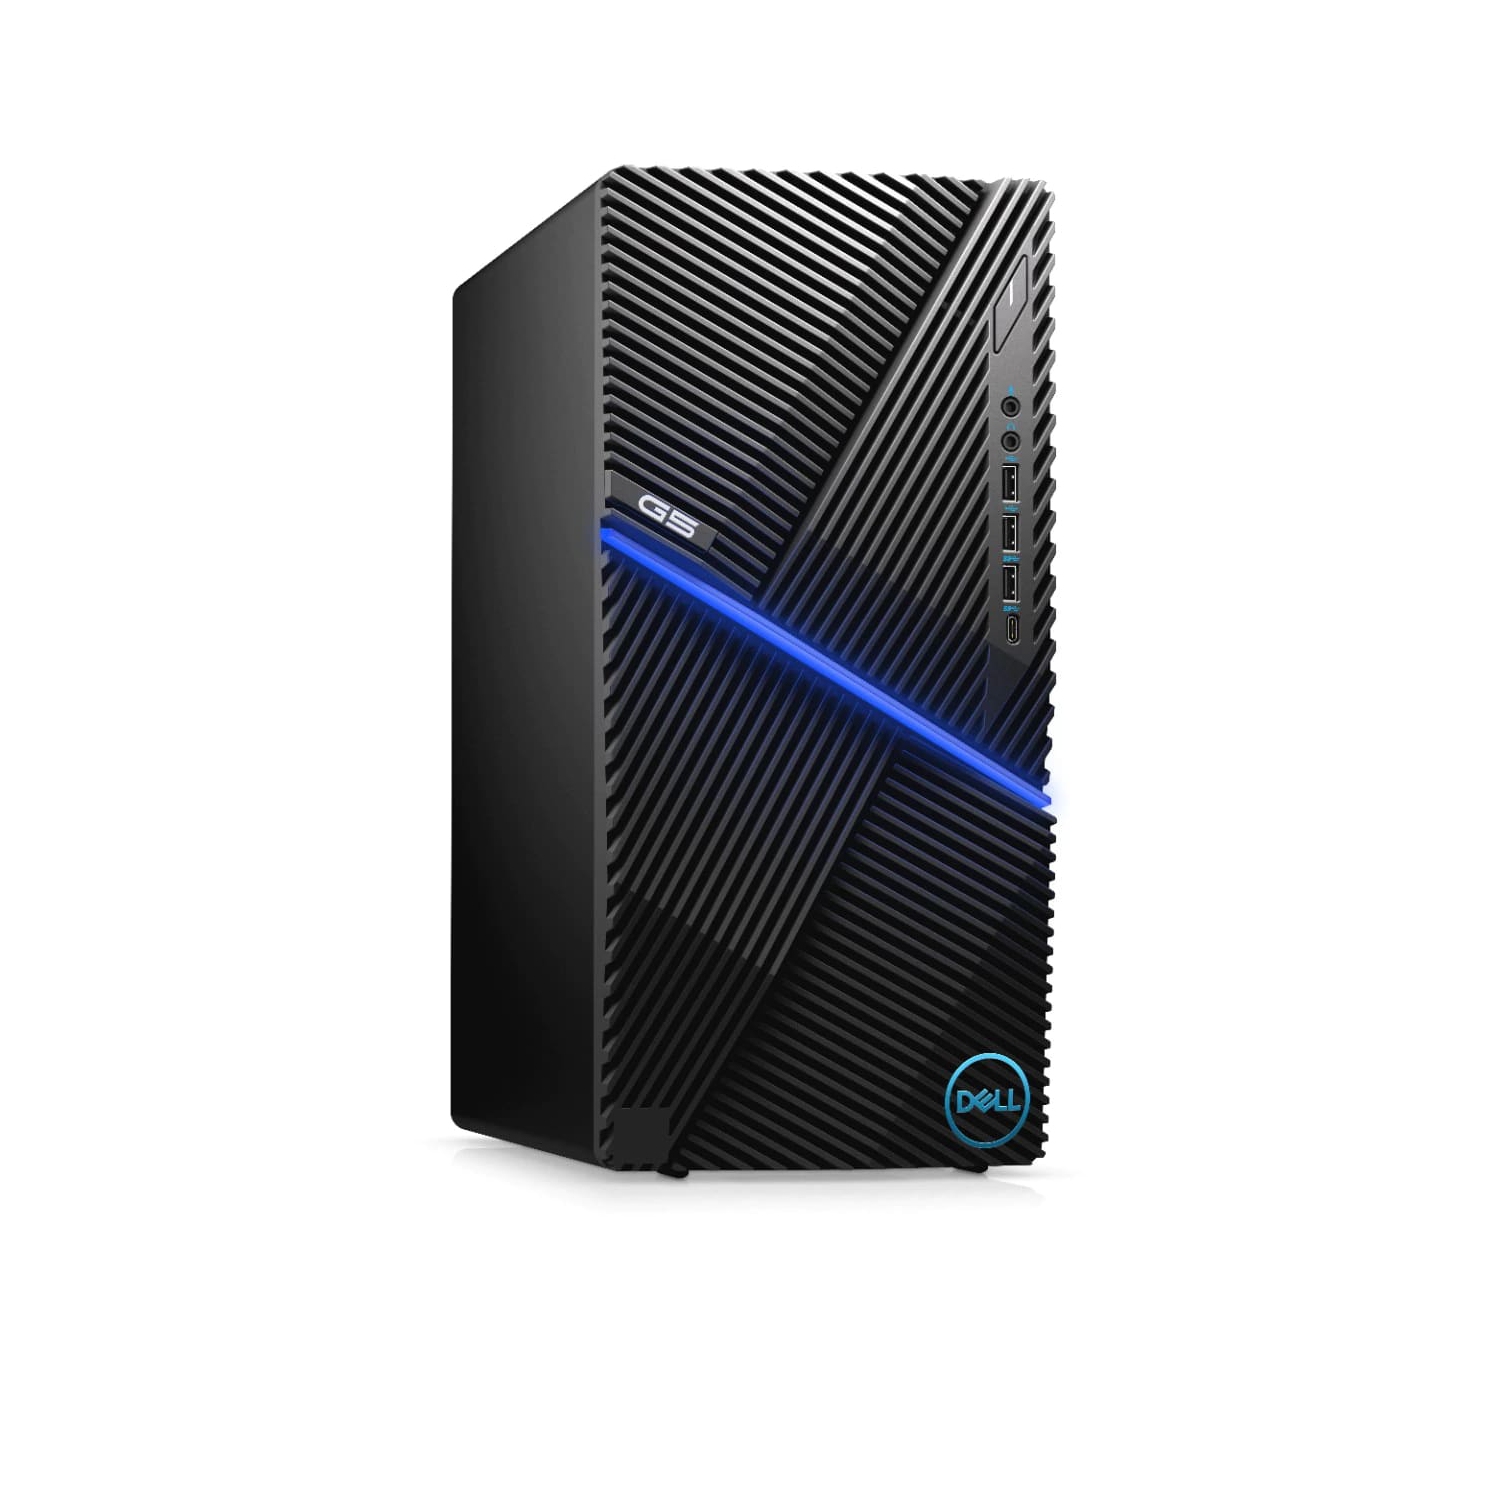 Refurbished (Excellent) - Dell G5 5000 Gaming Desktop (2020) | Core i7 - 512GB SSD - 16GB RAM - RTX 3060 | 8 Cores @ 5.1 GHz - 10th Gen CPU Certified Refurbished